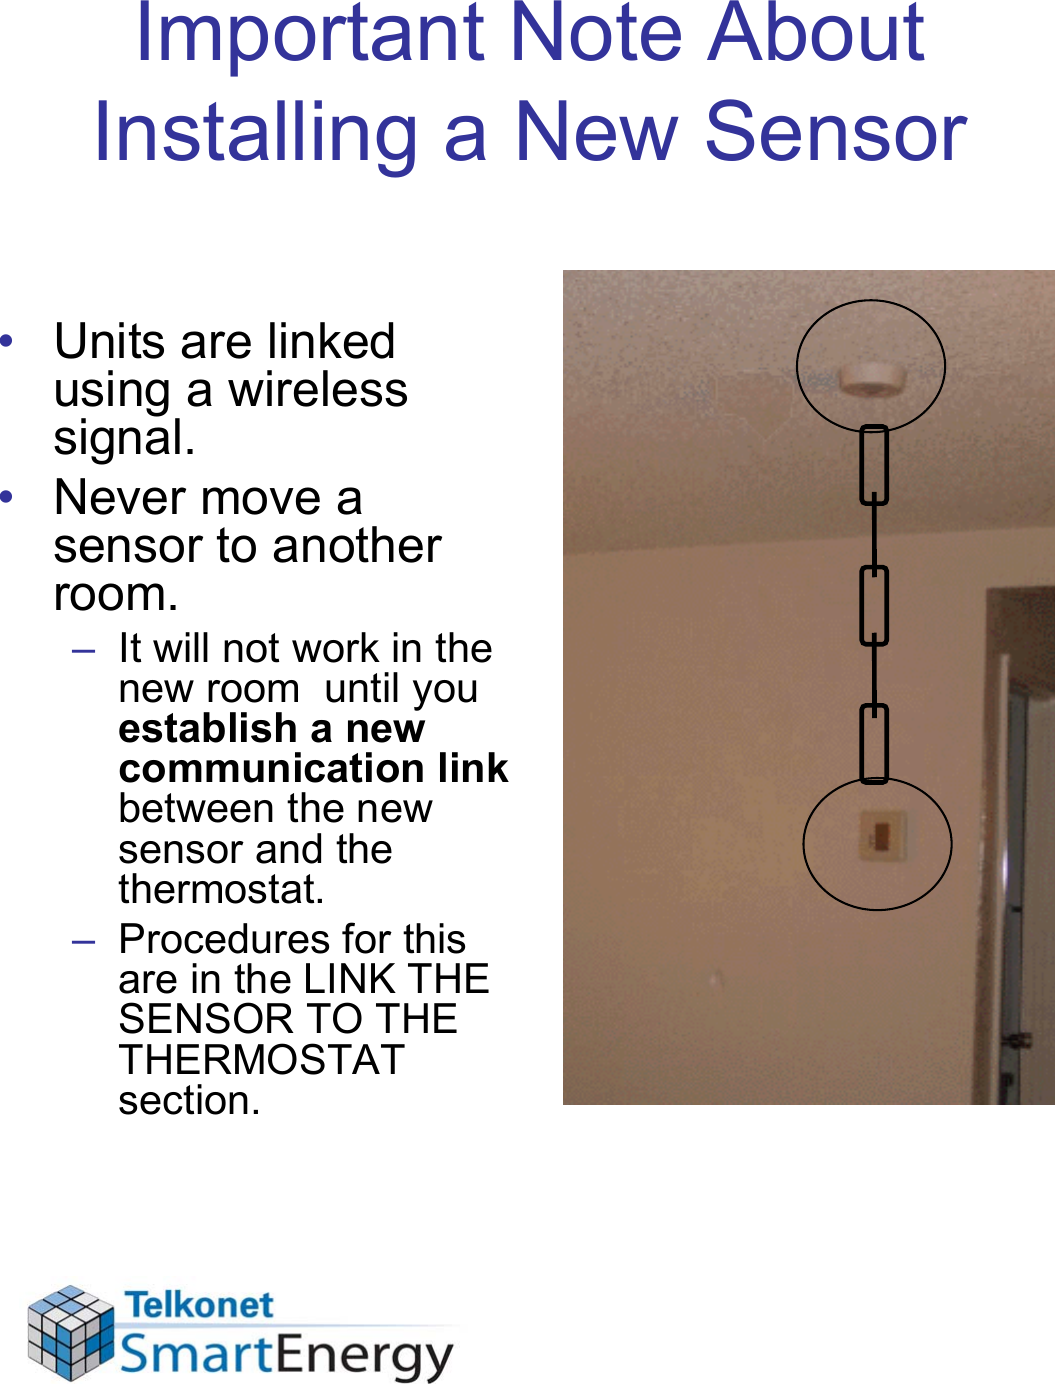 Important Note About Installing a New Sensor• Units are linked using a wireless signal. • Never move a sensor to another room. – It will not work in the new room  until you establish a new communication link between the new sensor and the thermostat. – Procedures for this are in the LINK THE SENSOR TO THE THERMOSTAT section.